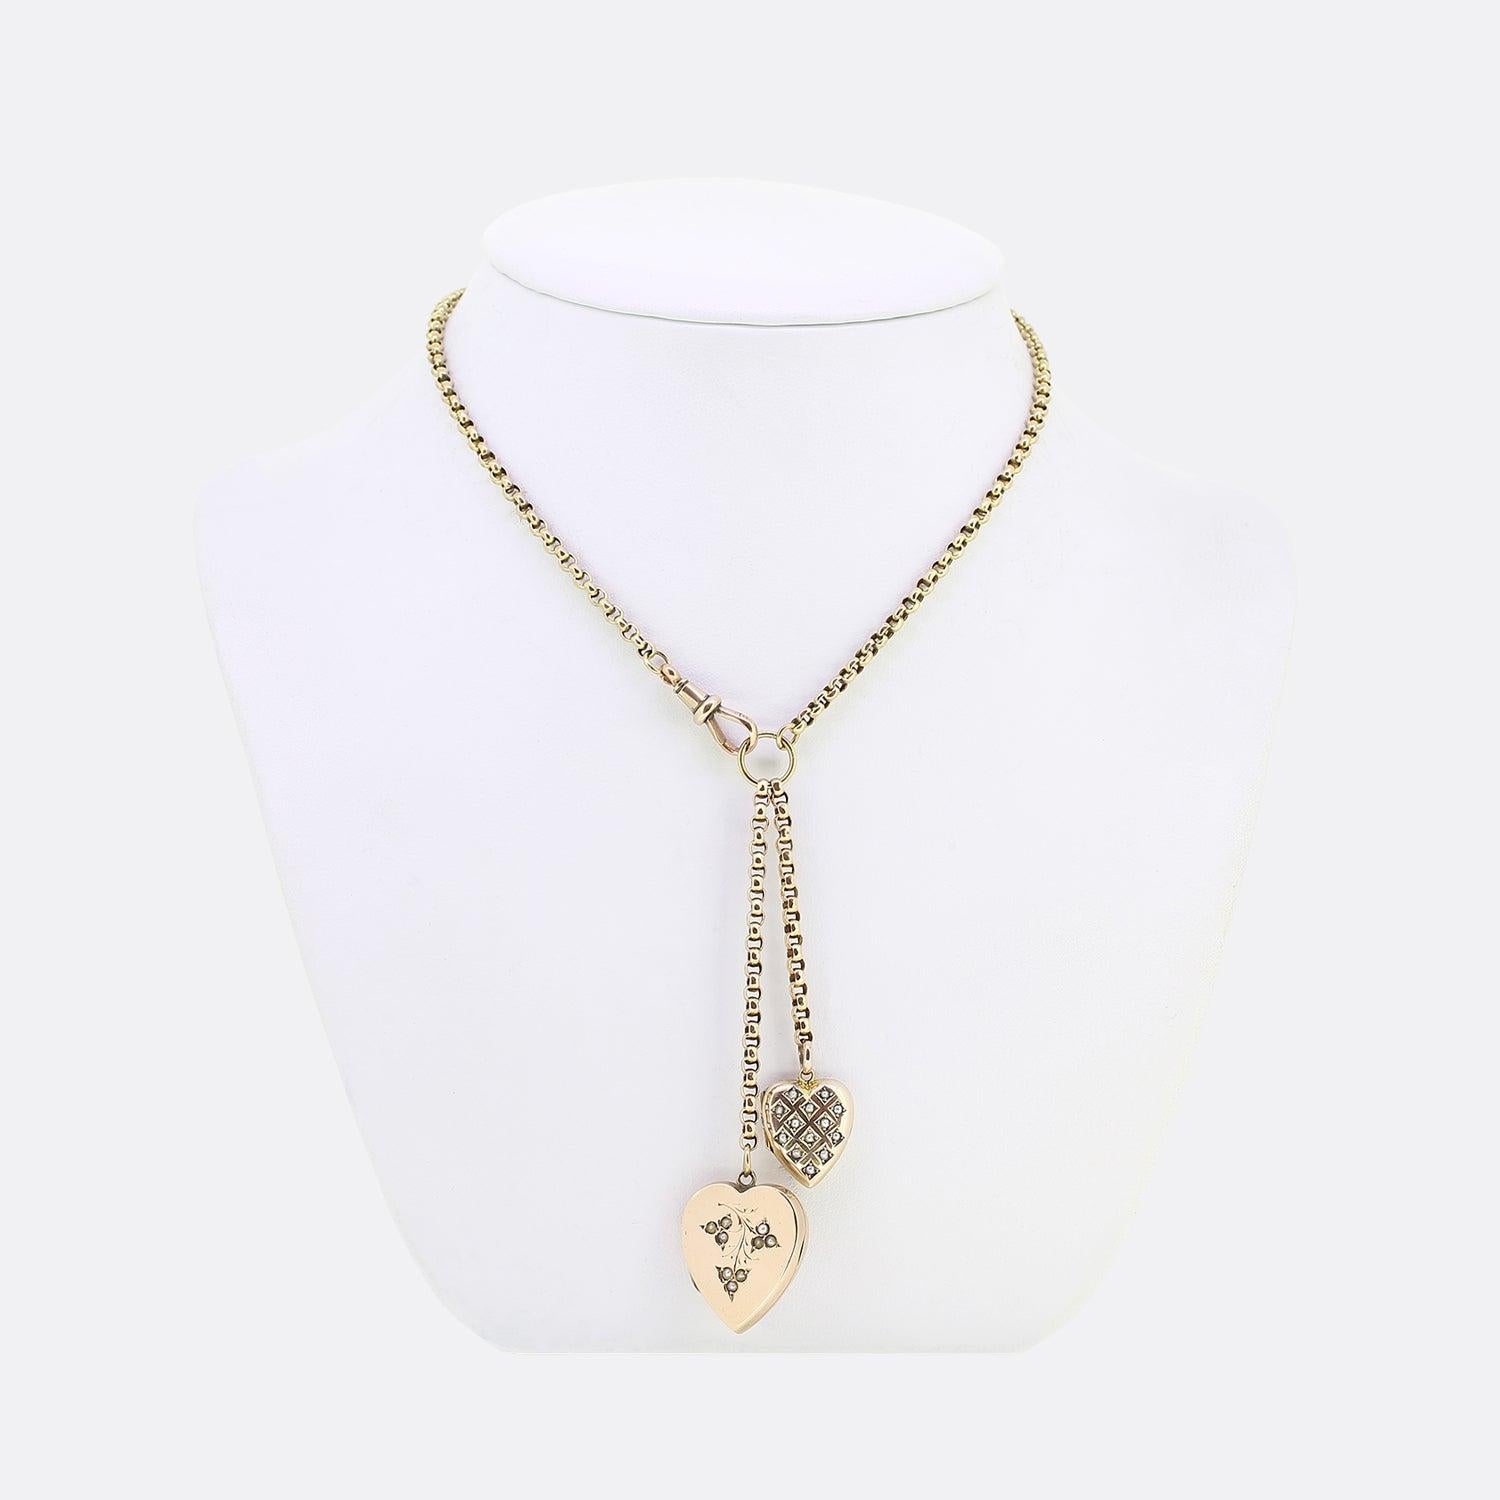 Here we have a vintage 9ct yellow gold belcher chain link charm necklace. The necklace plays host to a duo of love heart lockets which hang harmoniously side-by-side; each of which is set with an array of seed pearls and can be opened allowing the